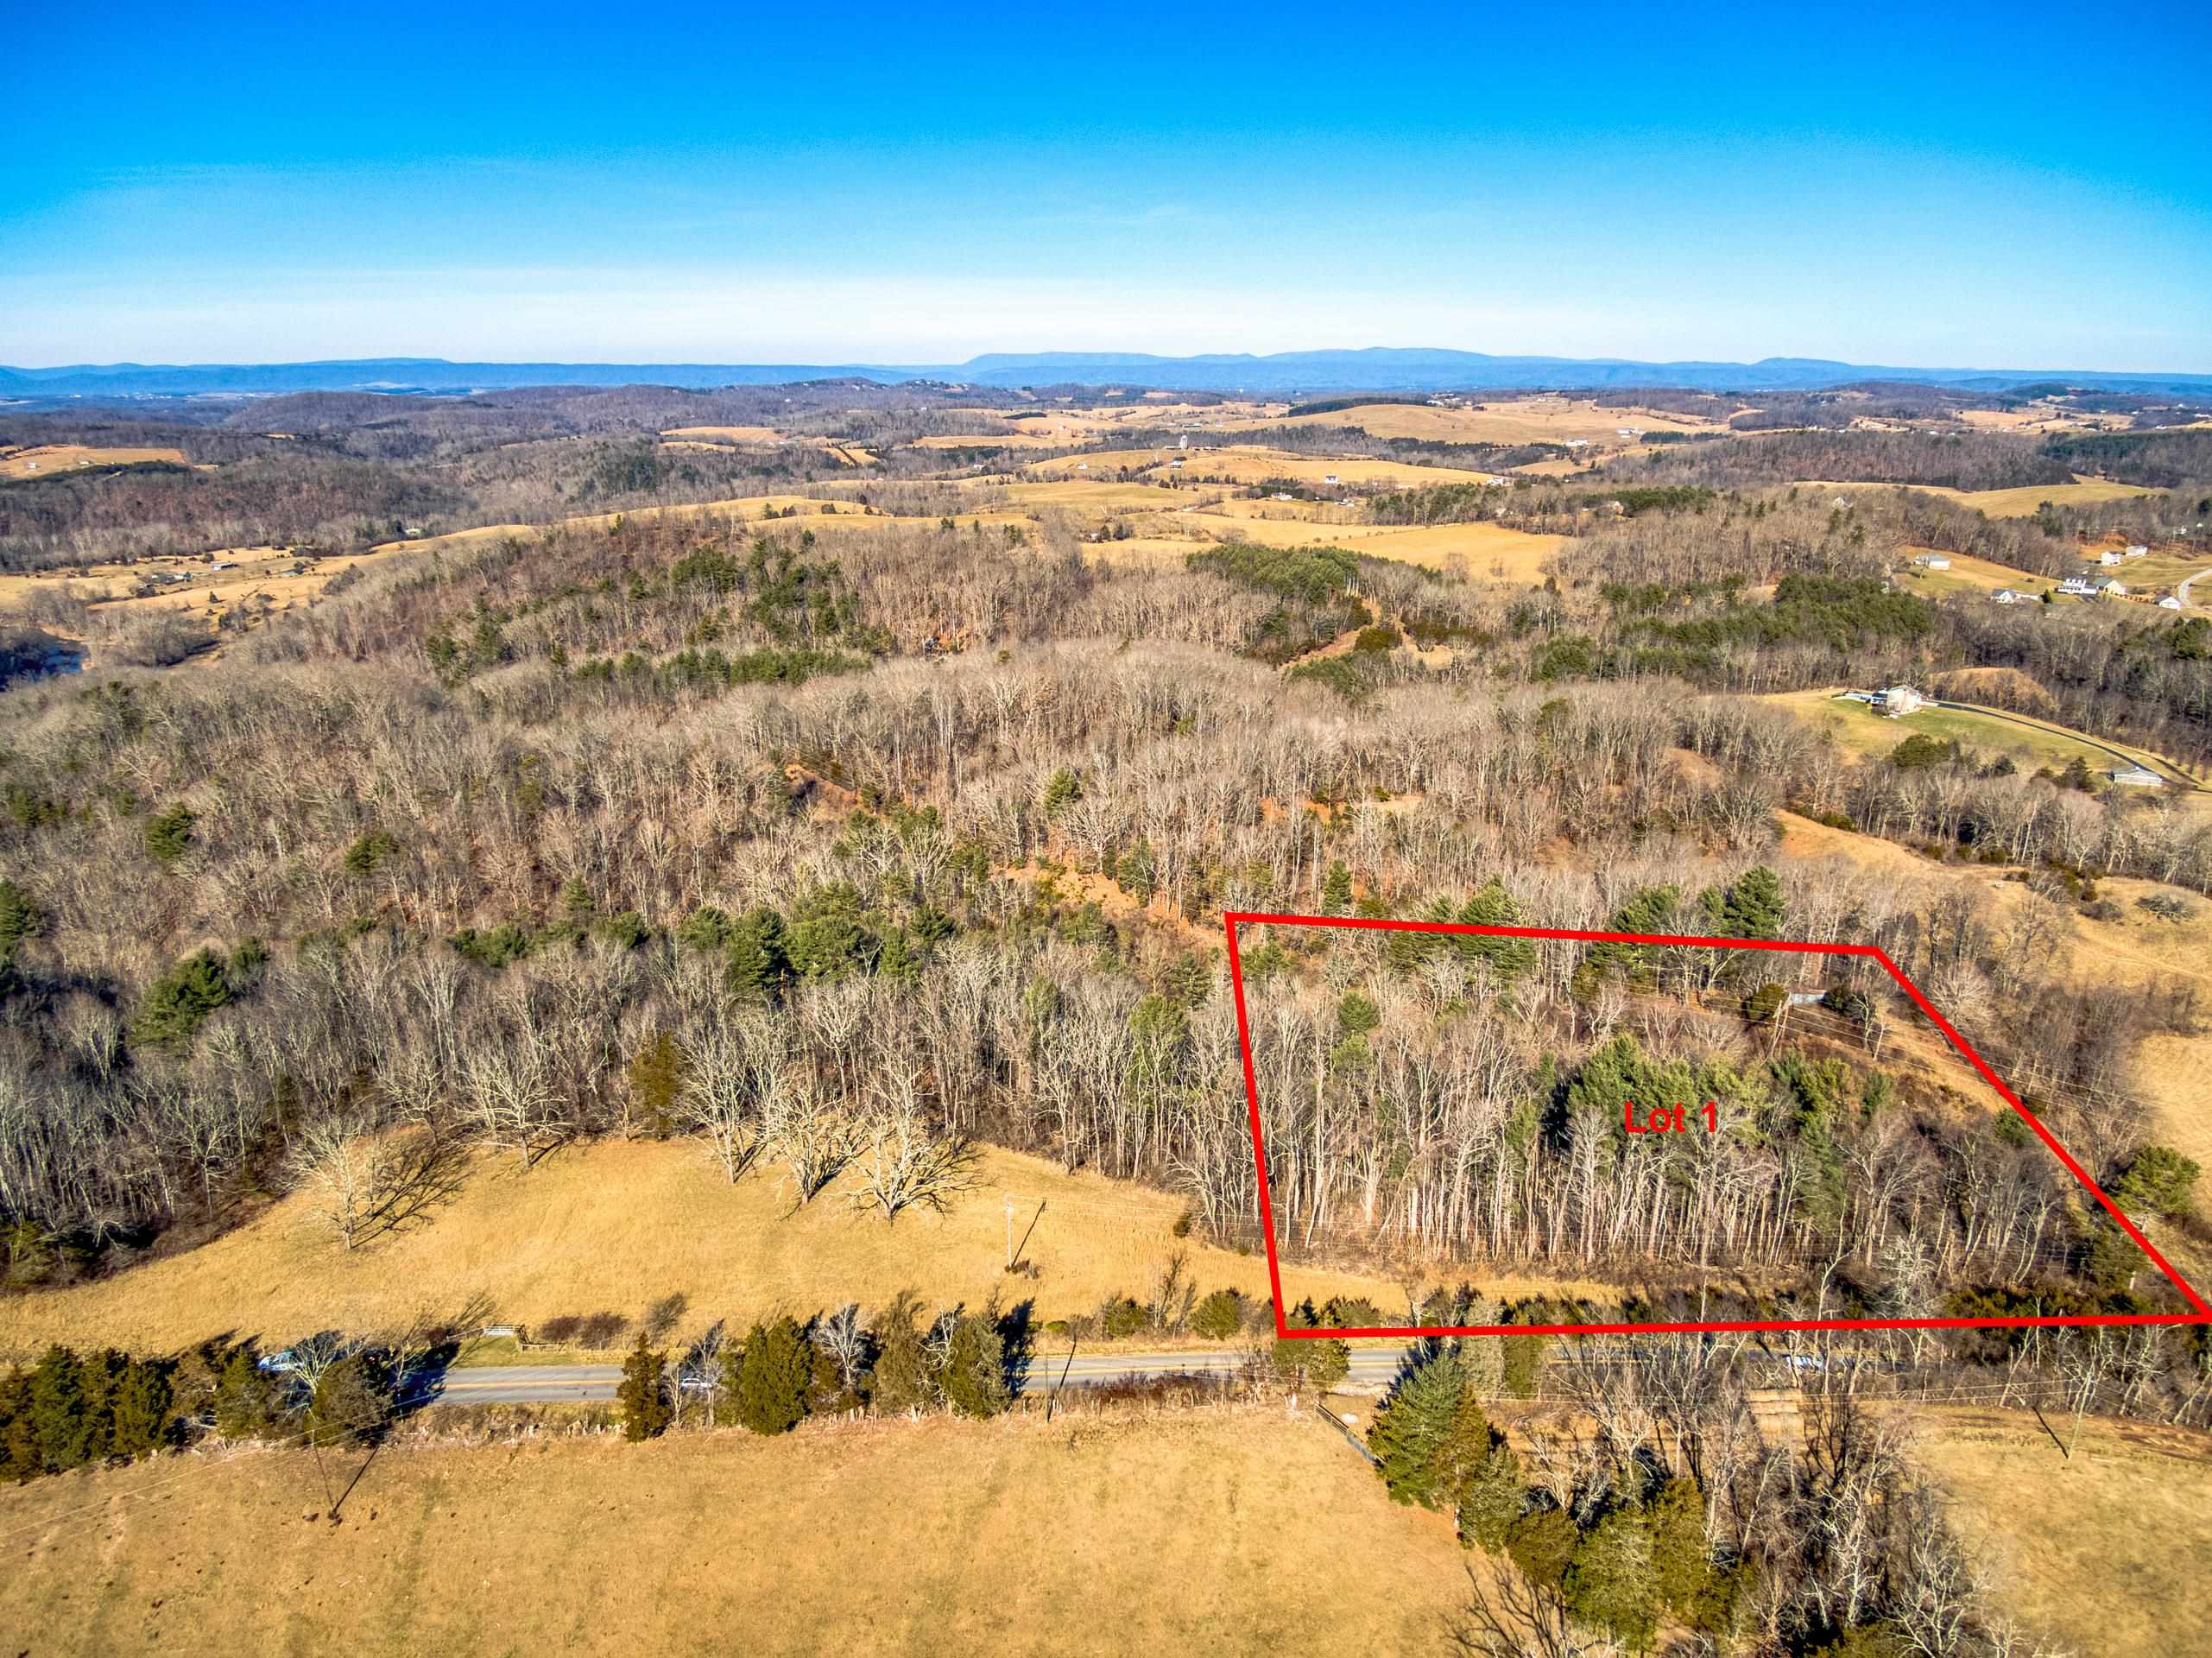 Nice five acre building lot with open space and woods. Private location with convenience to RU, Carilion NRV, and I-81. Property has an old family cemetery in the rear along the fence line with a 30' ROW, should not impact a building site. Lots rarely come available in this desirable location. Storage building does not convey. Schedule your tour today!